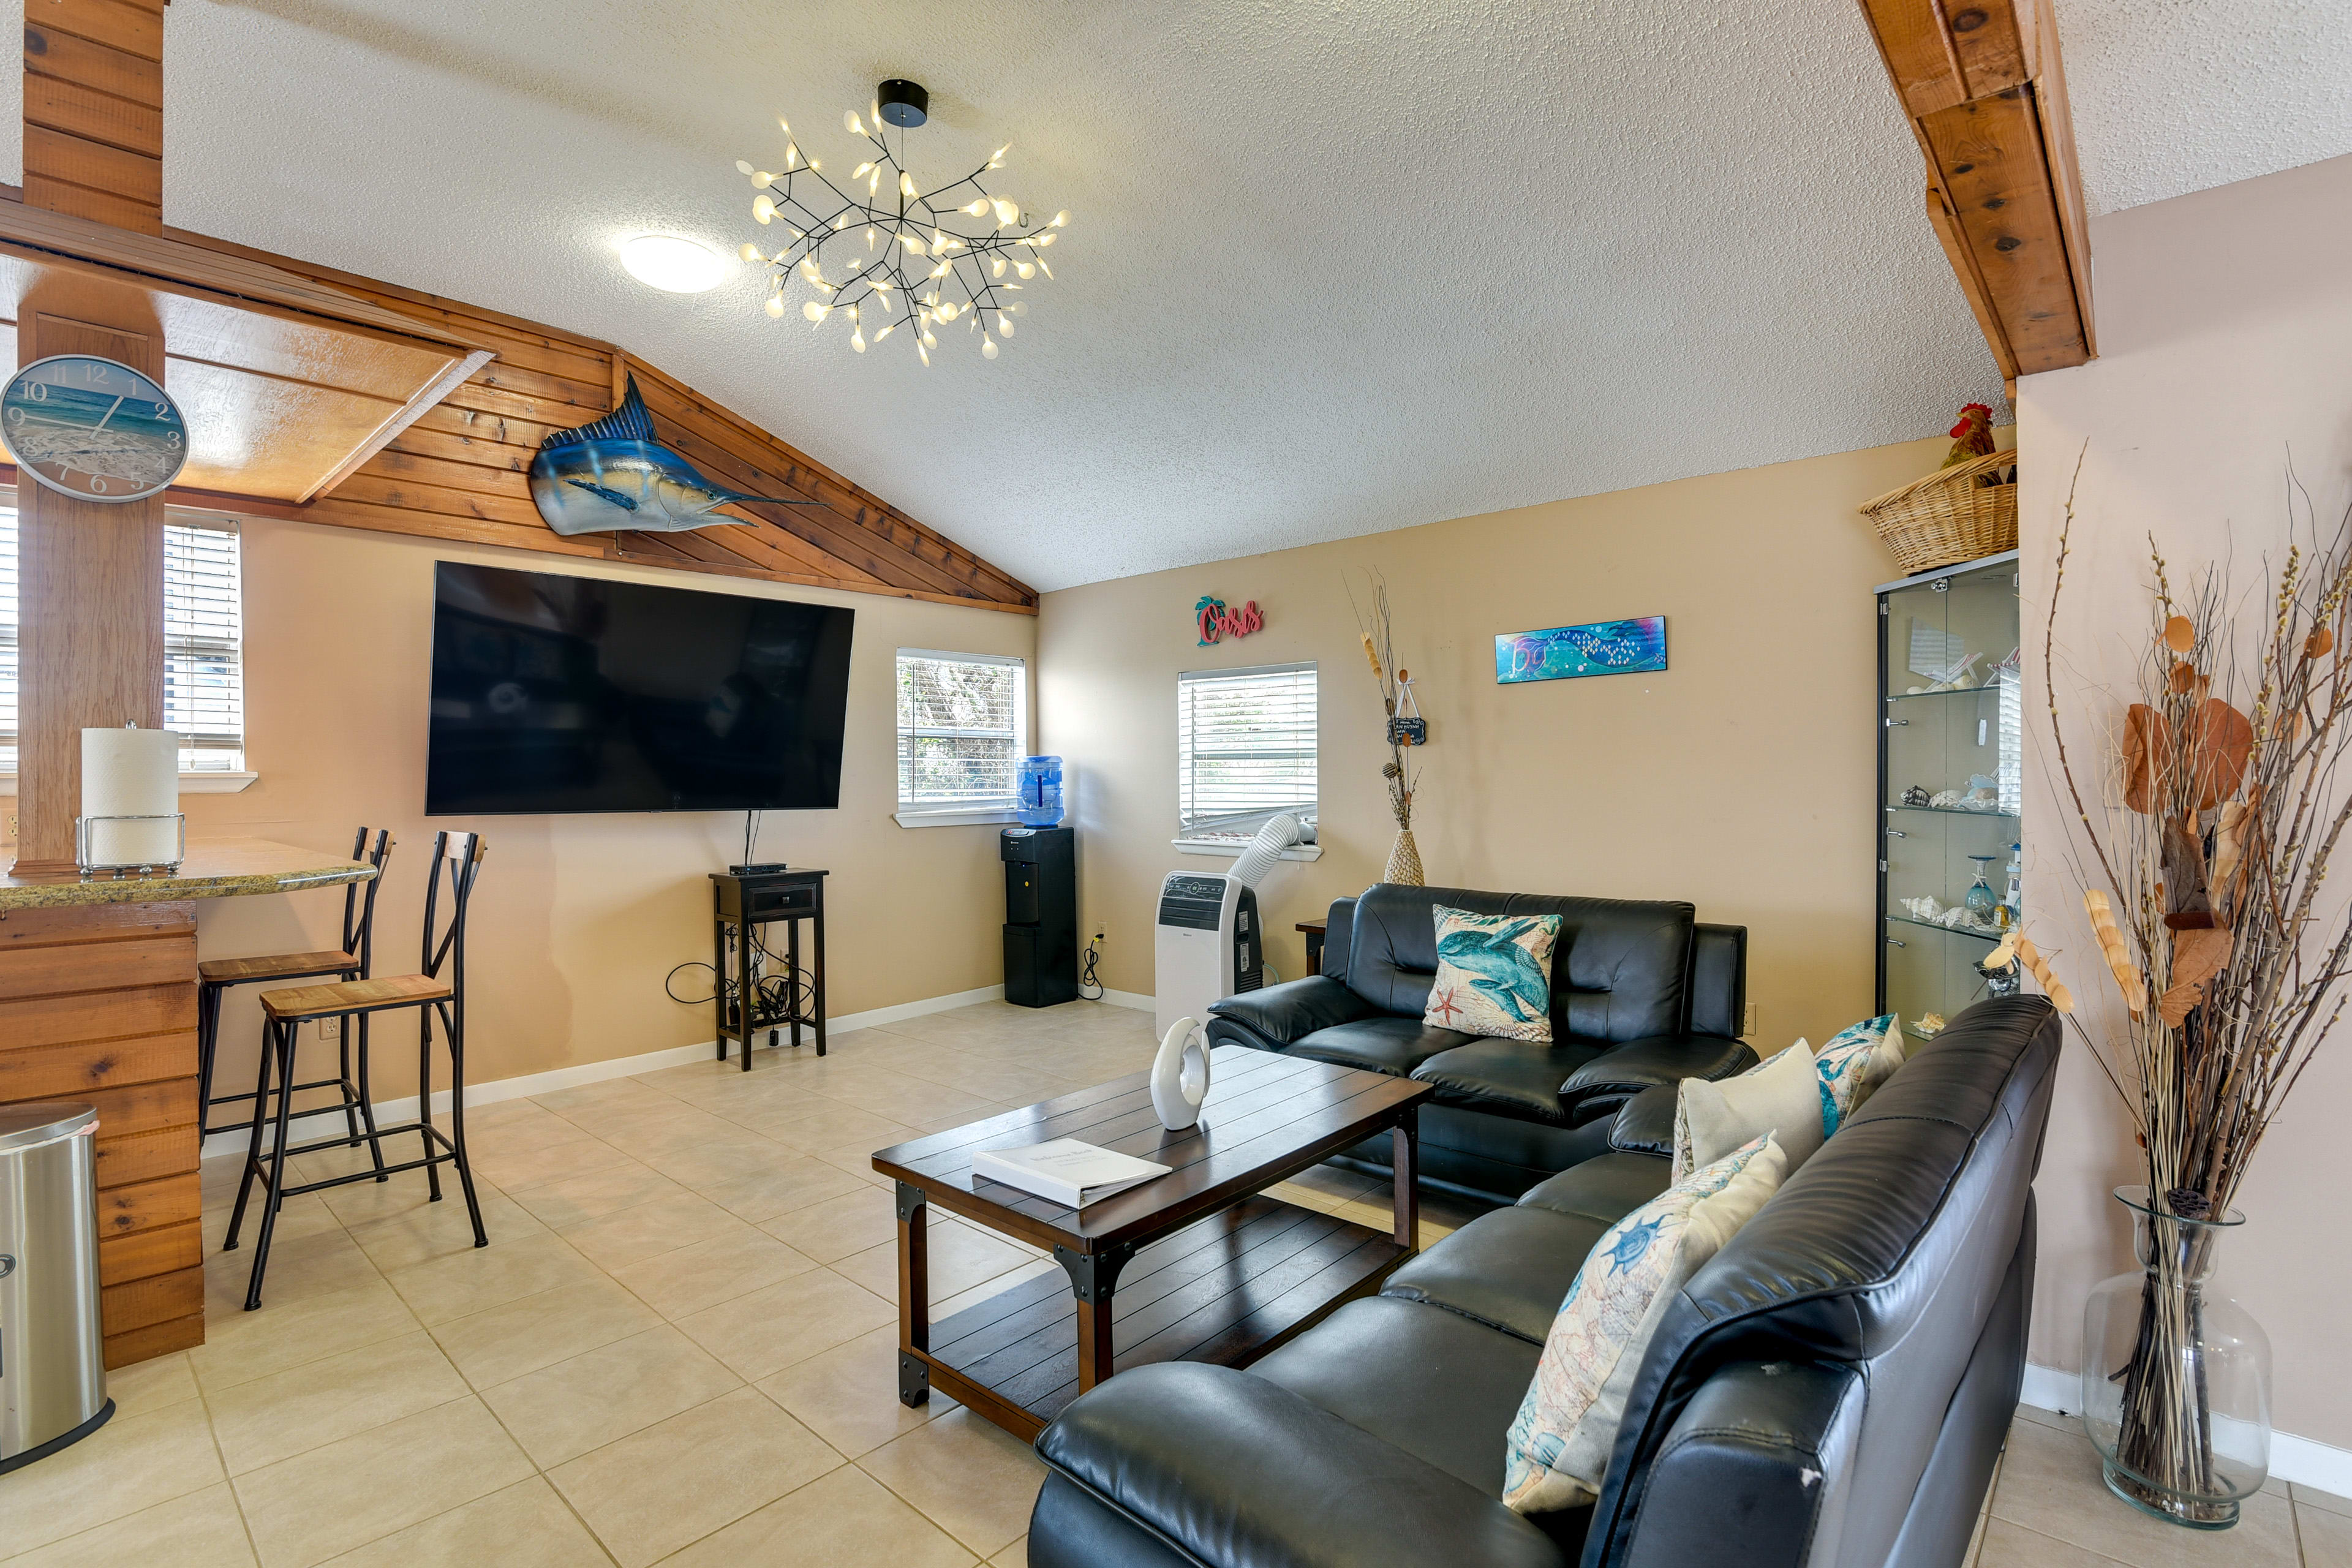 Freeport Vacation Rental | 3BR | 2.5BA | Stairs Required to Access | 1,949 Sq Ft